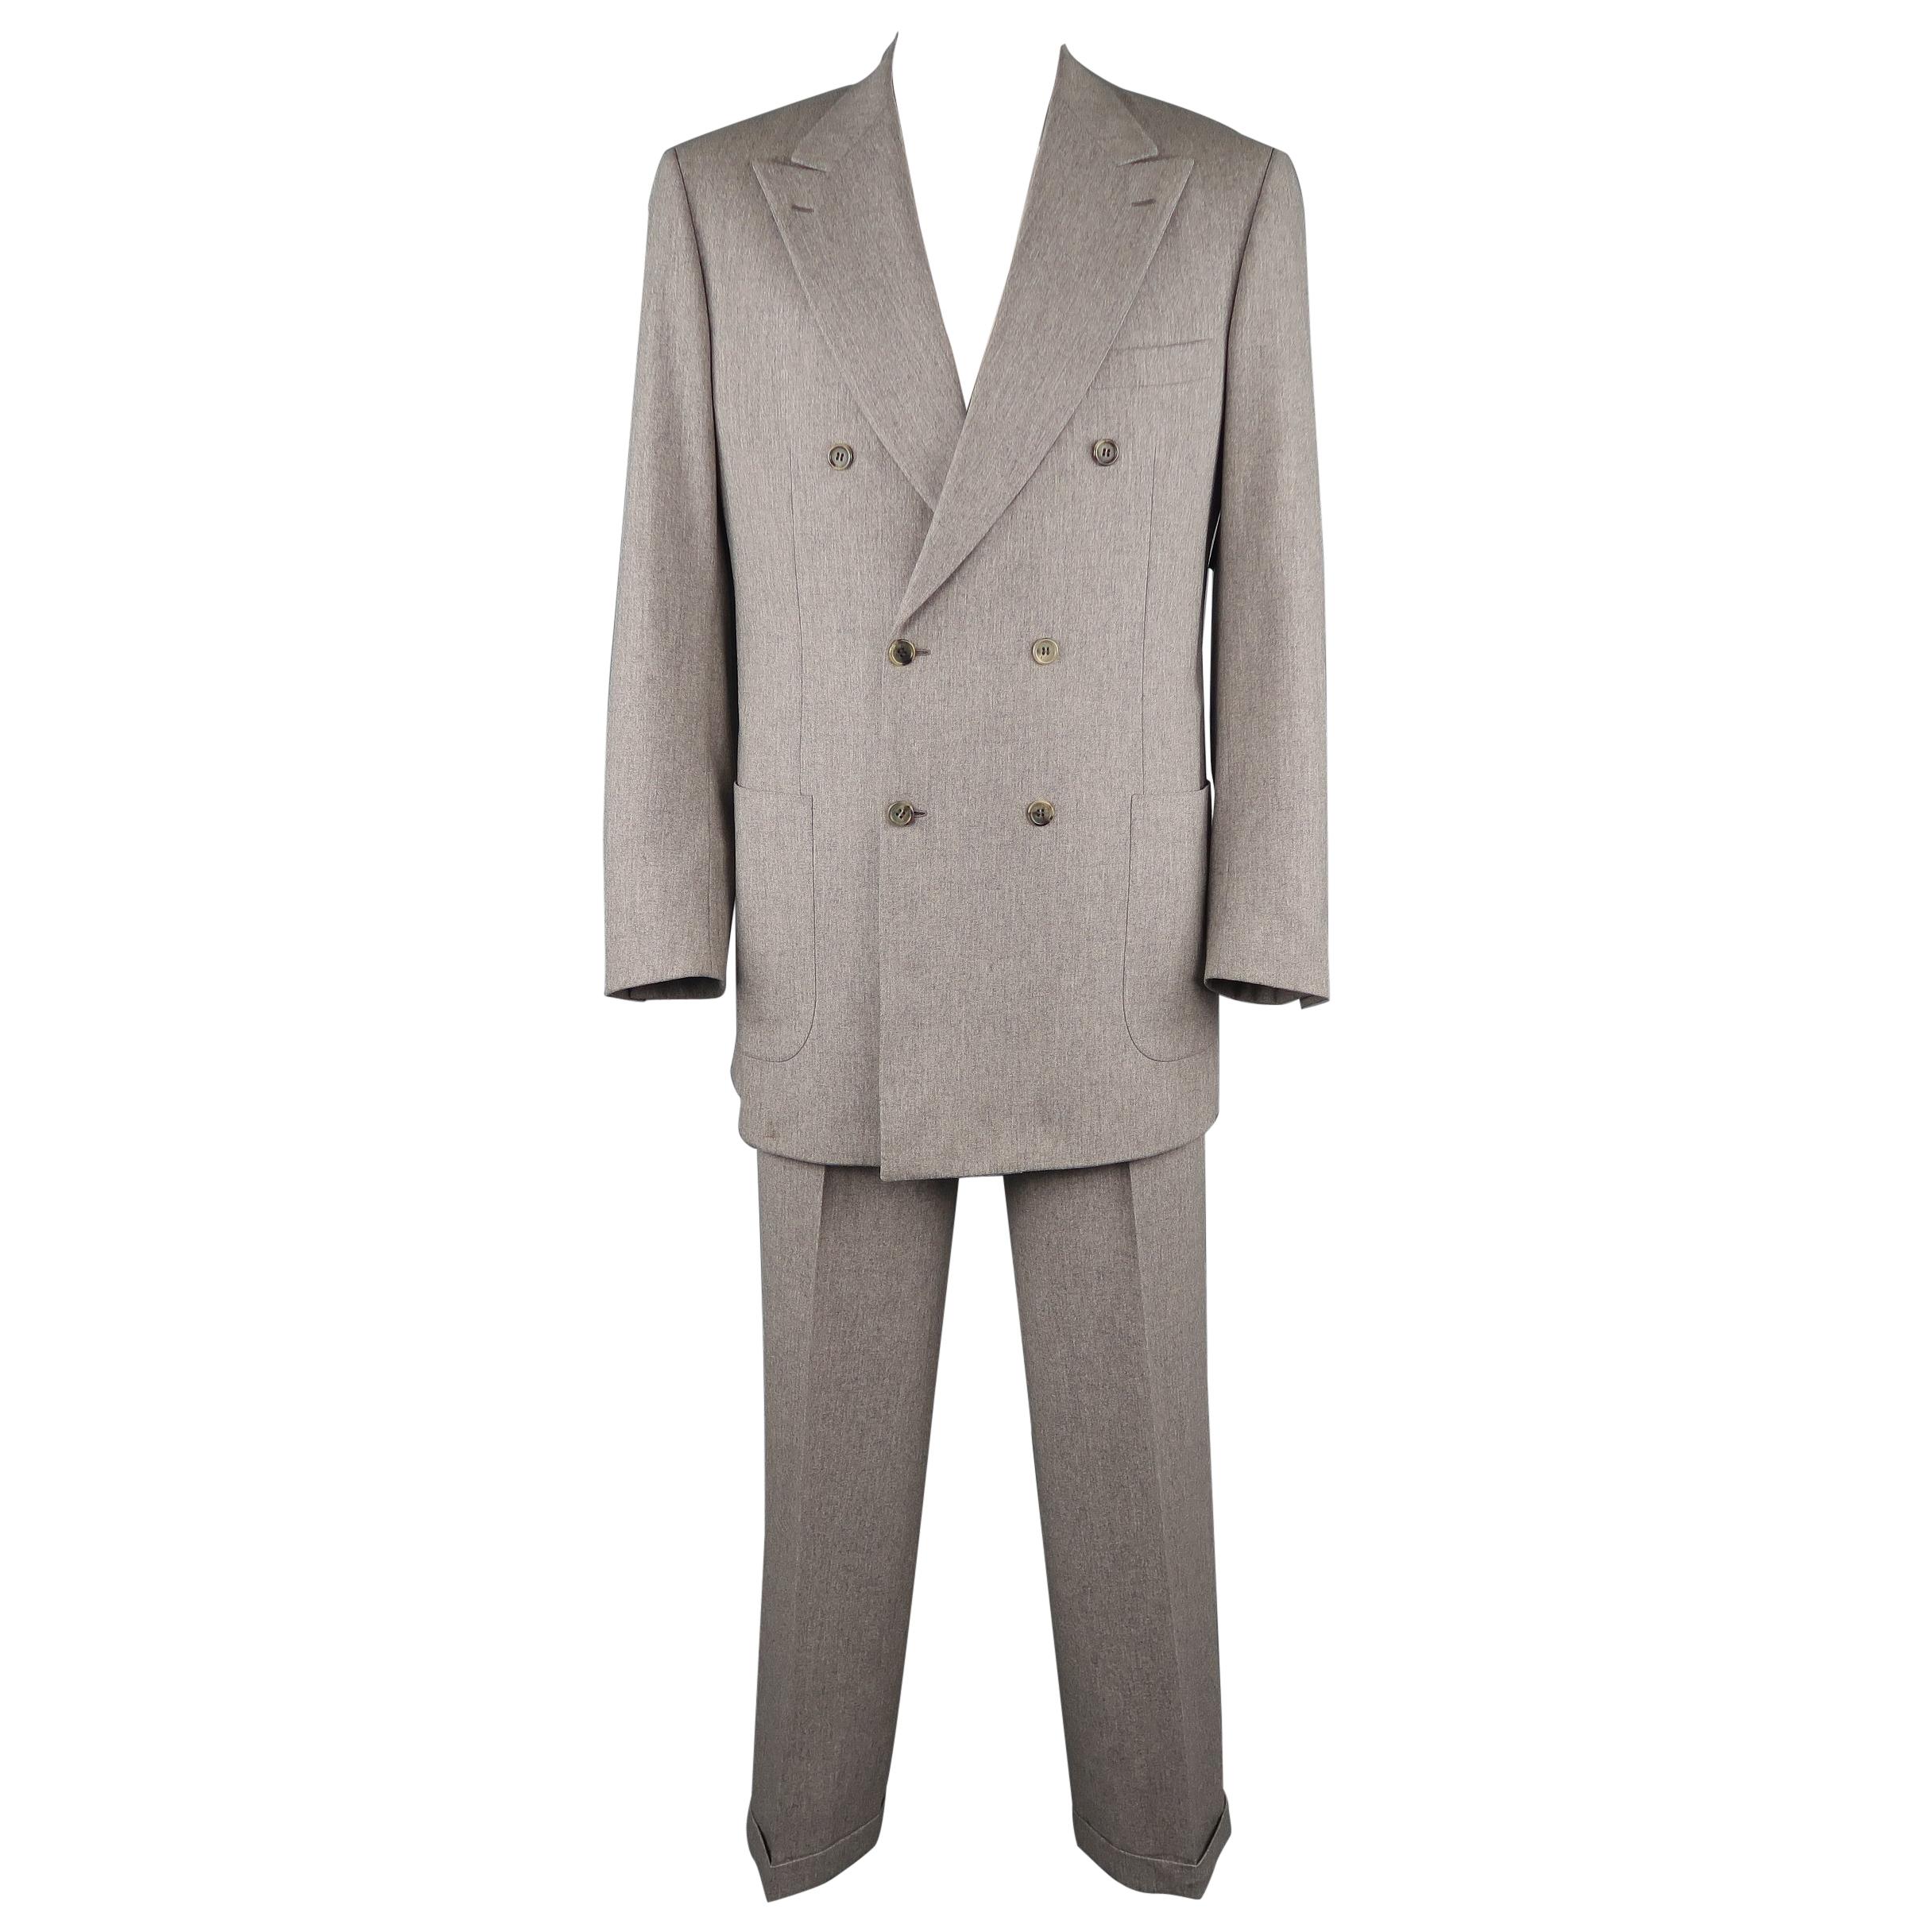 BRIONI 44 Long Wool Light Heather Gray Double Breasted Peak Lapel Cuffed Suit